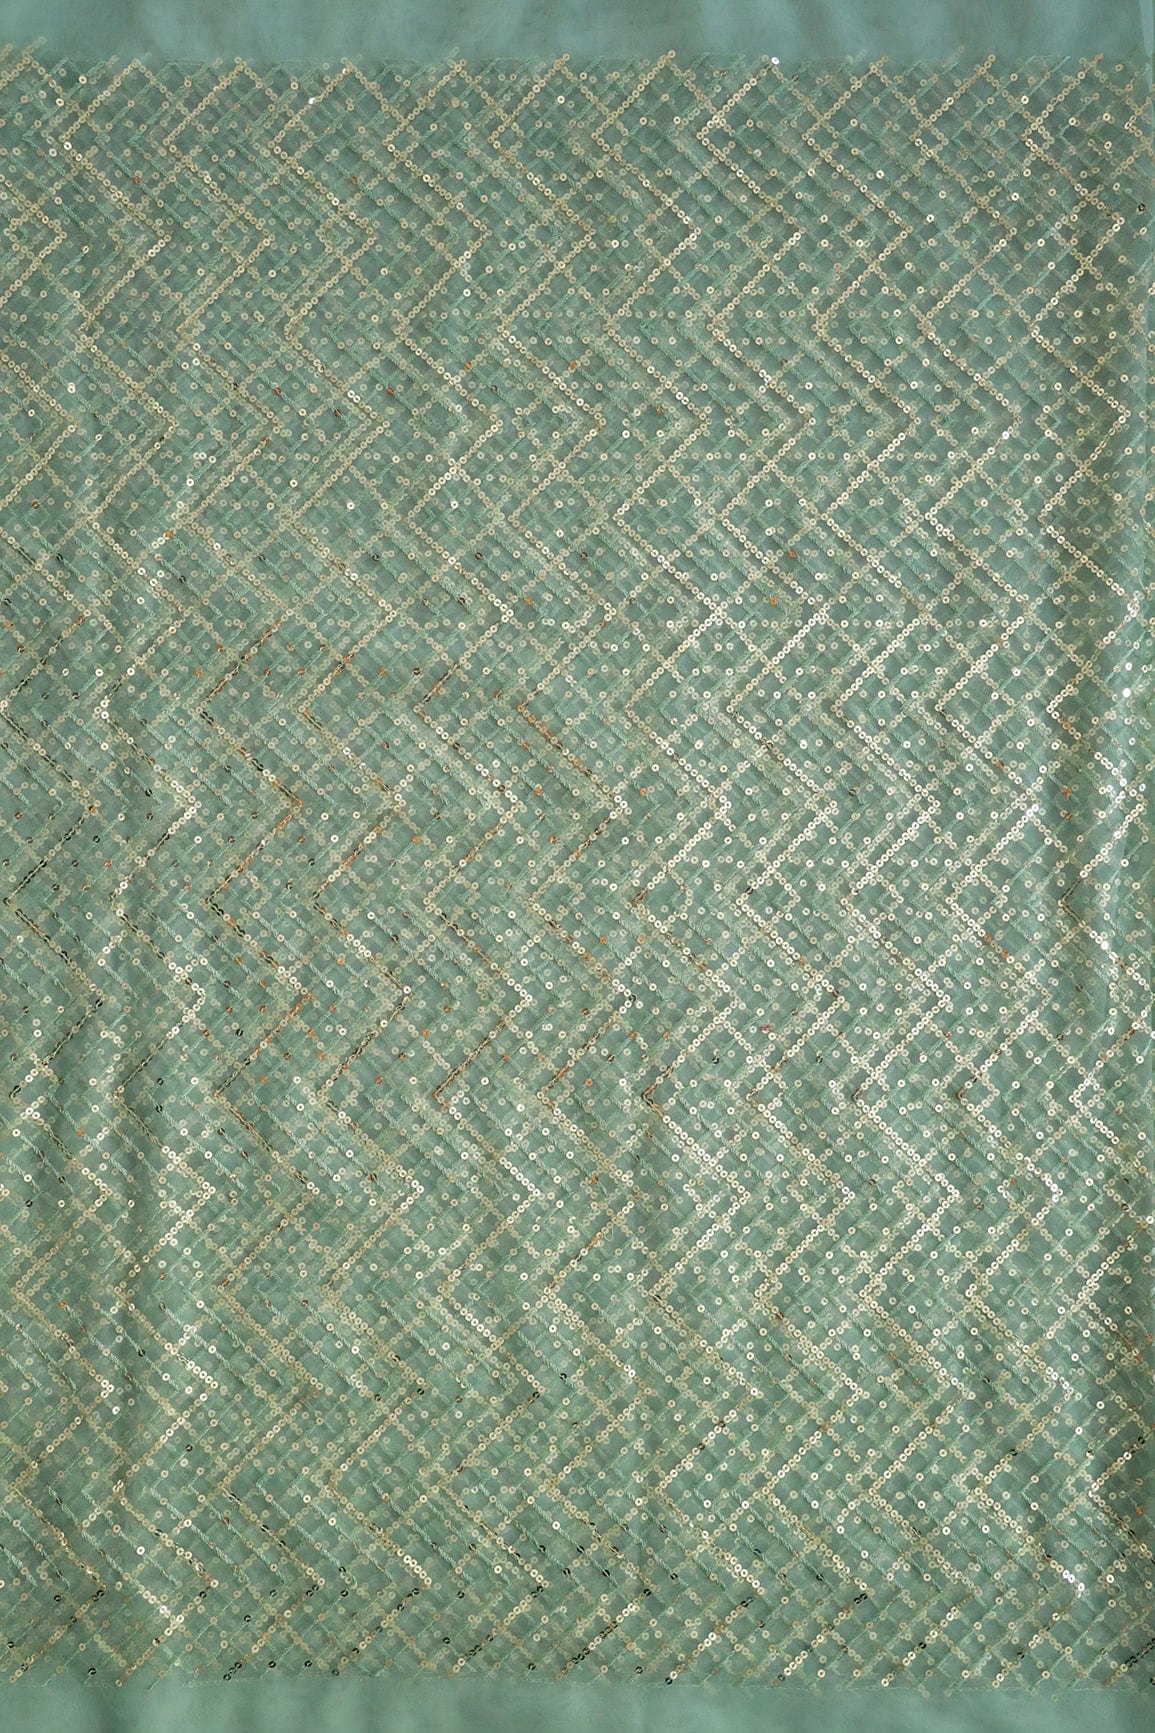 doeraa Embroidery Fabrics Gold Sequins With Olive Thread Chevron Embroidery Work On Olive Soft Net Fabric